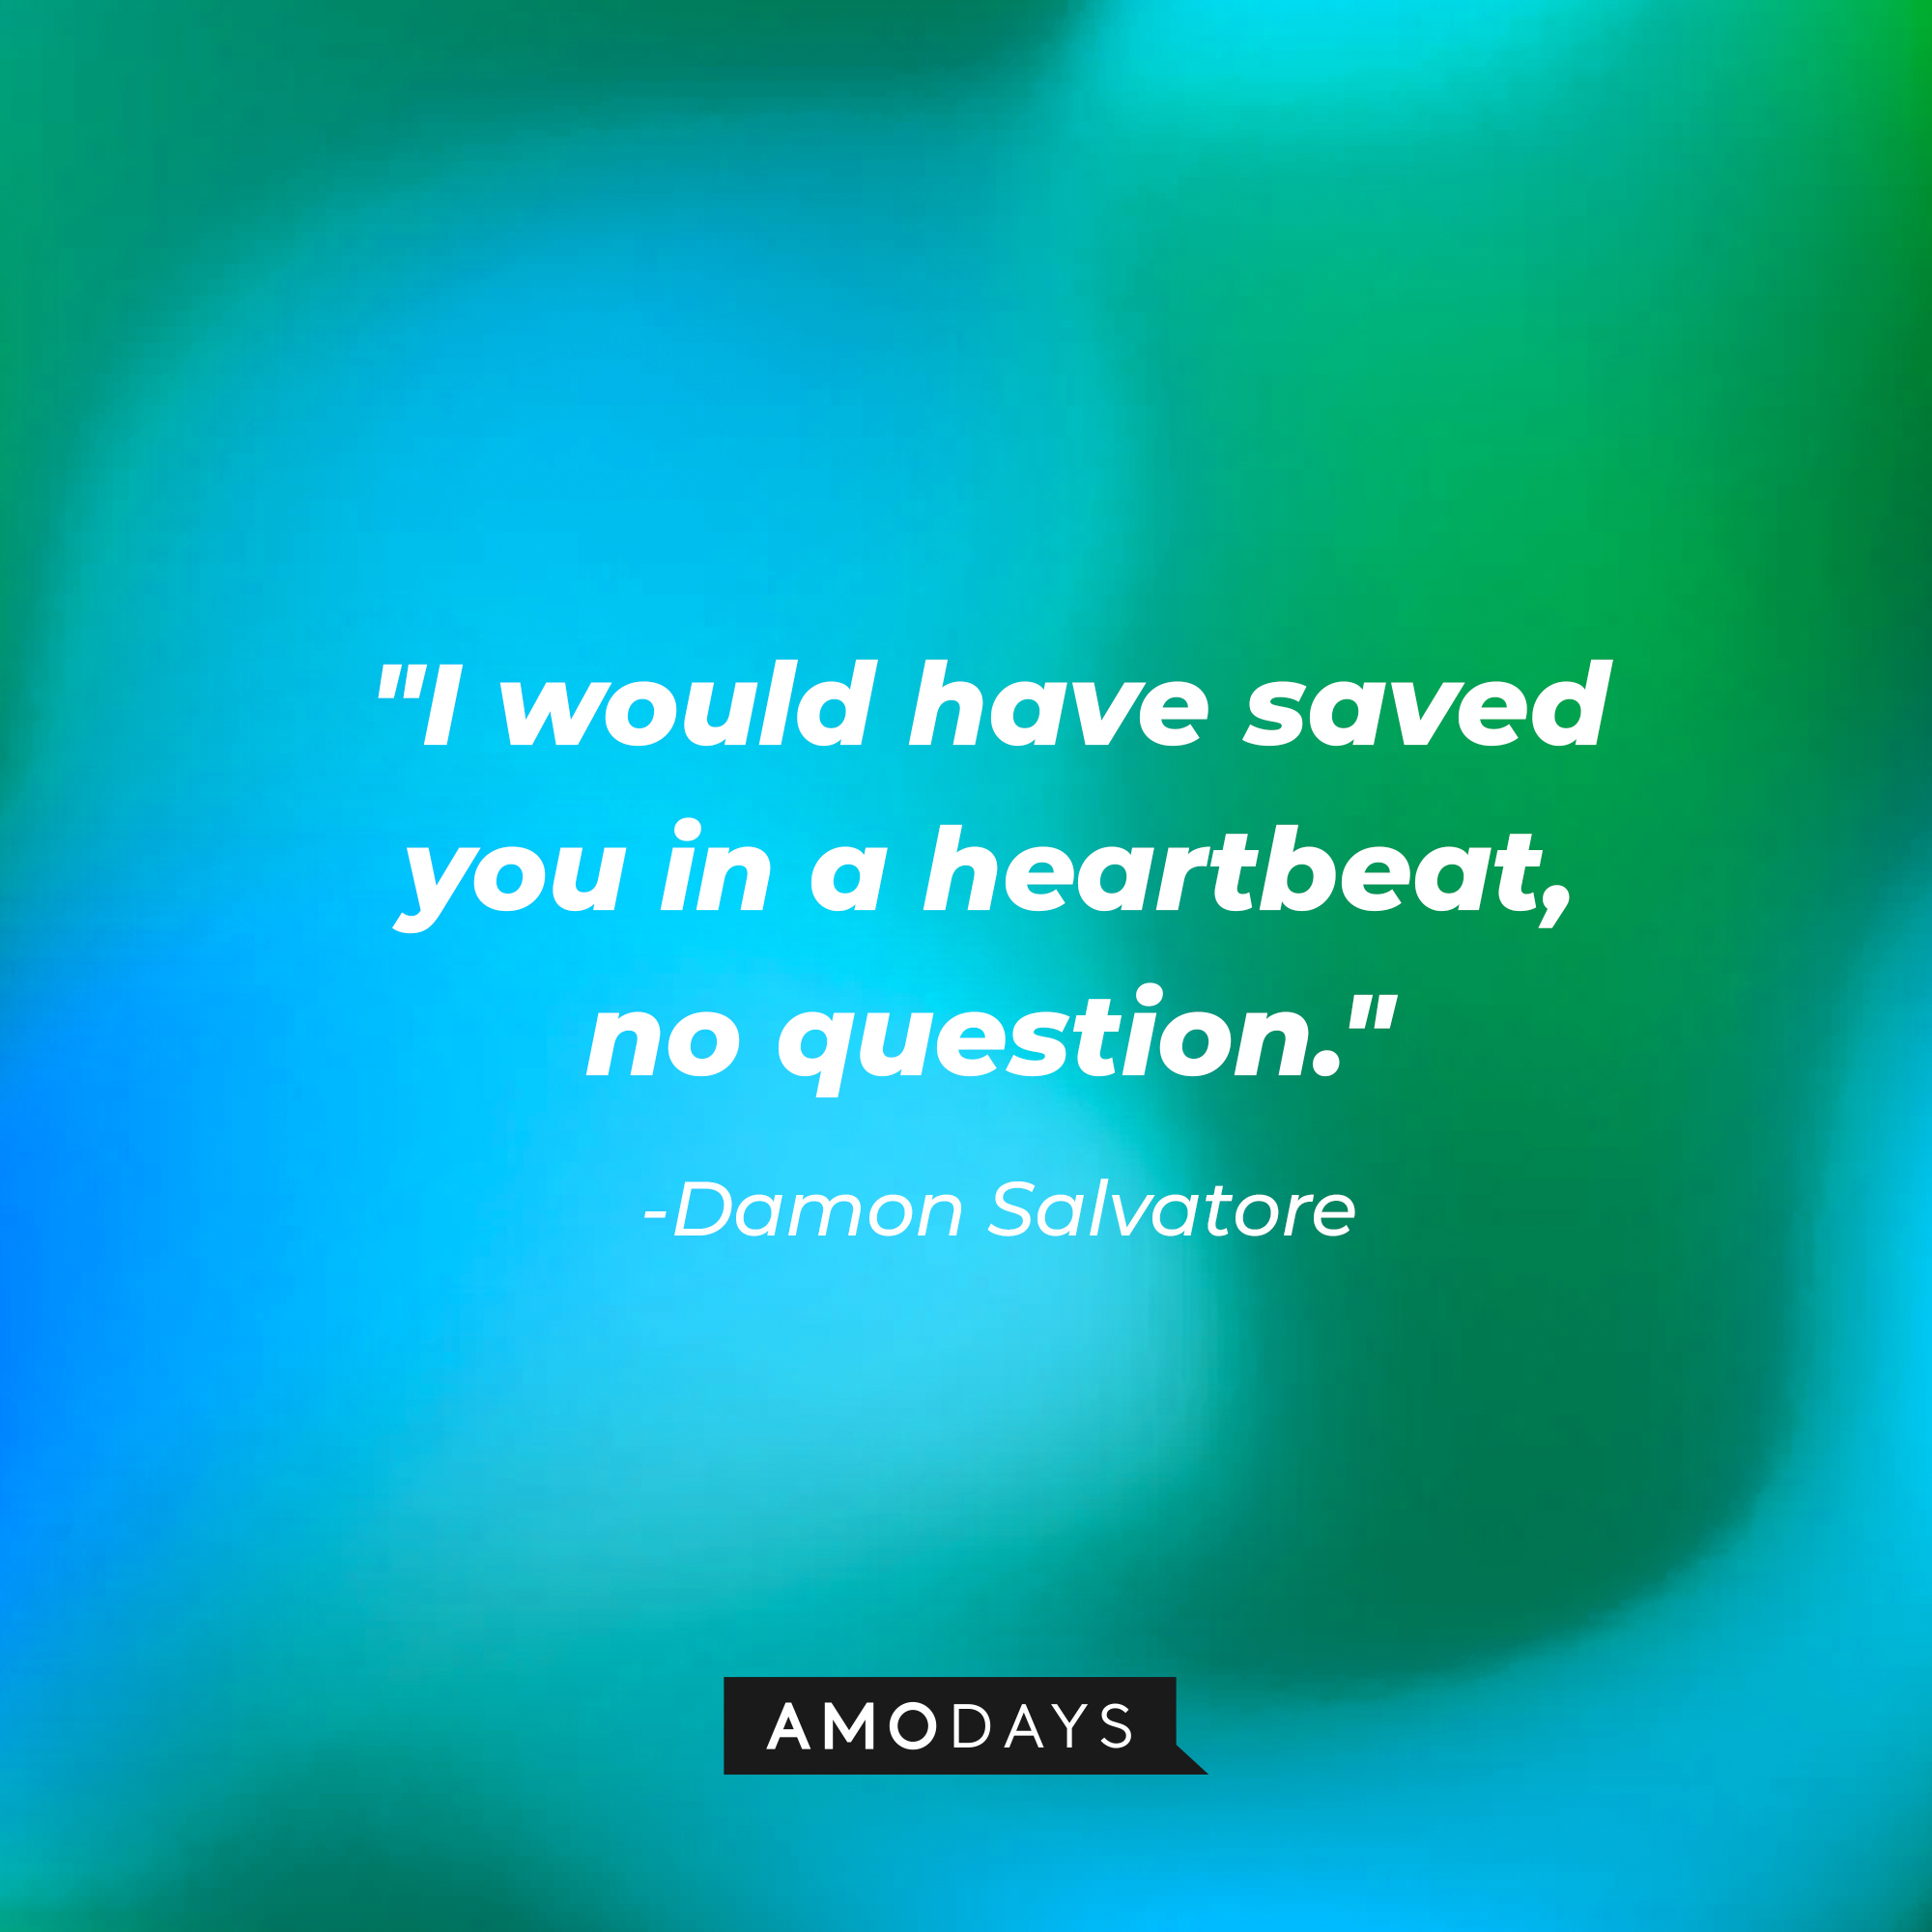 Damon Salvatore's quote: "I would have saved you in a heartbeat, no question." | Source: AmoDays